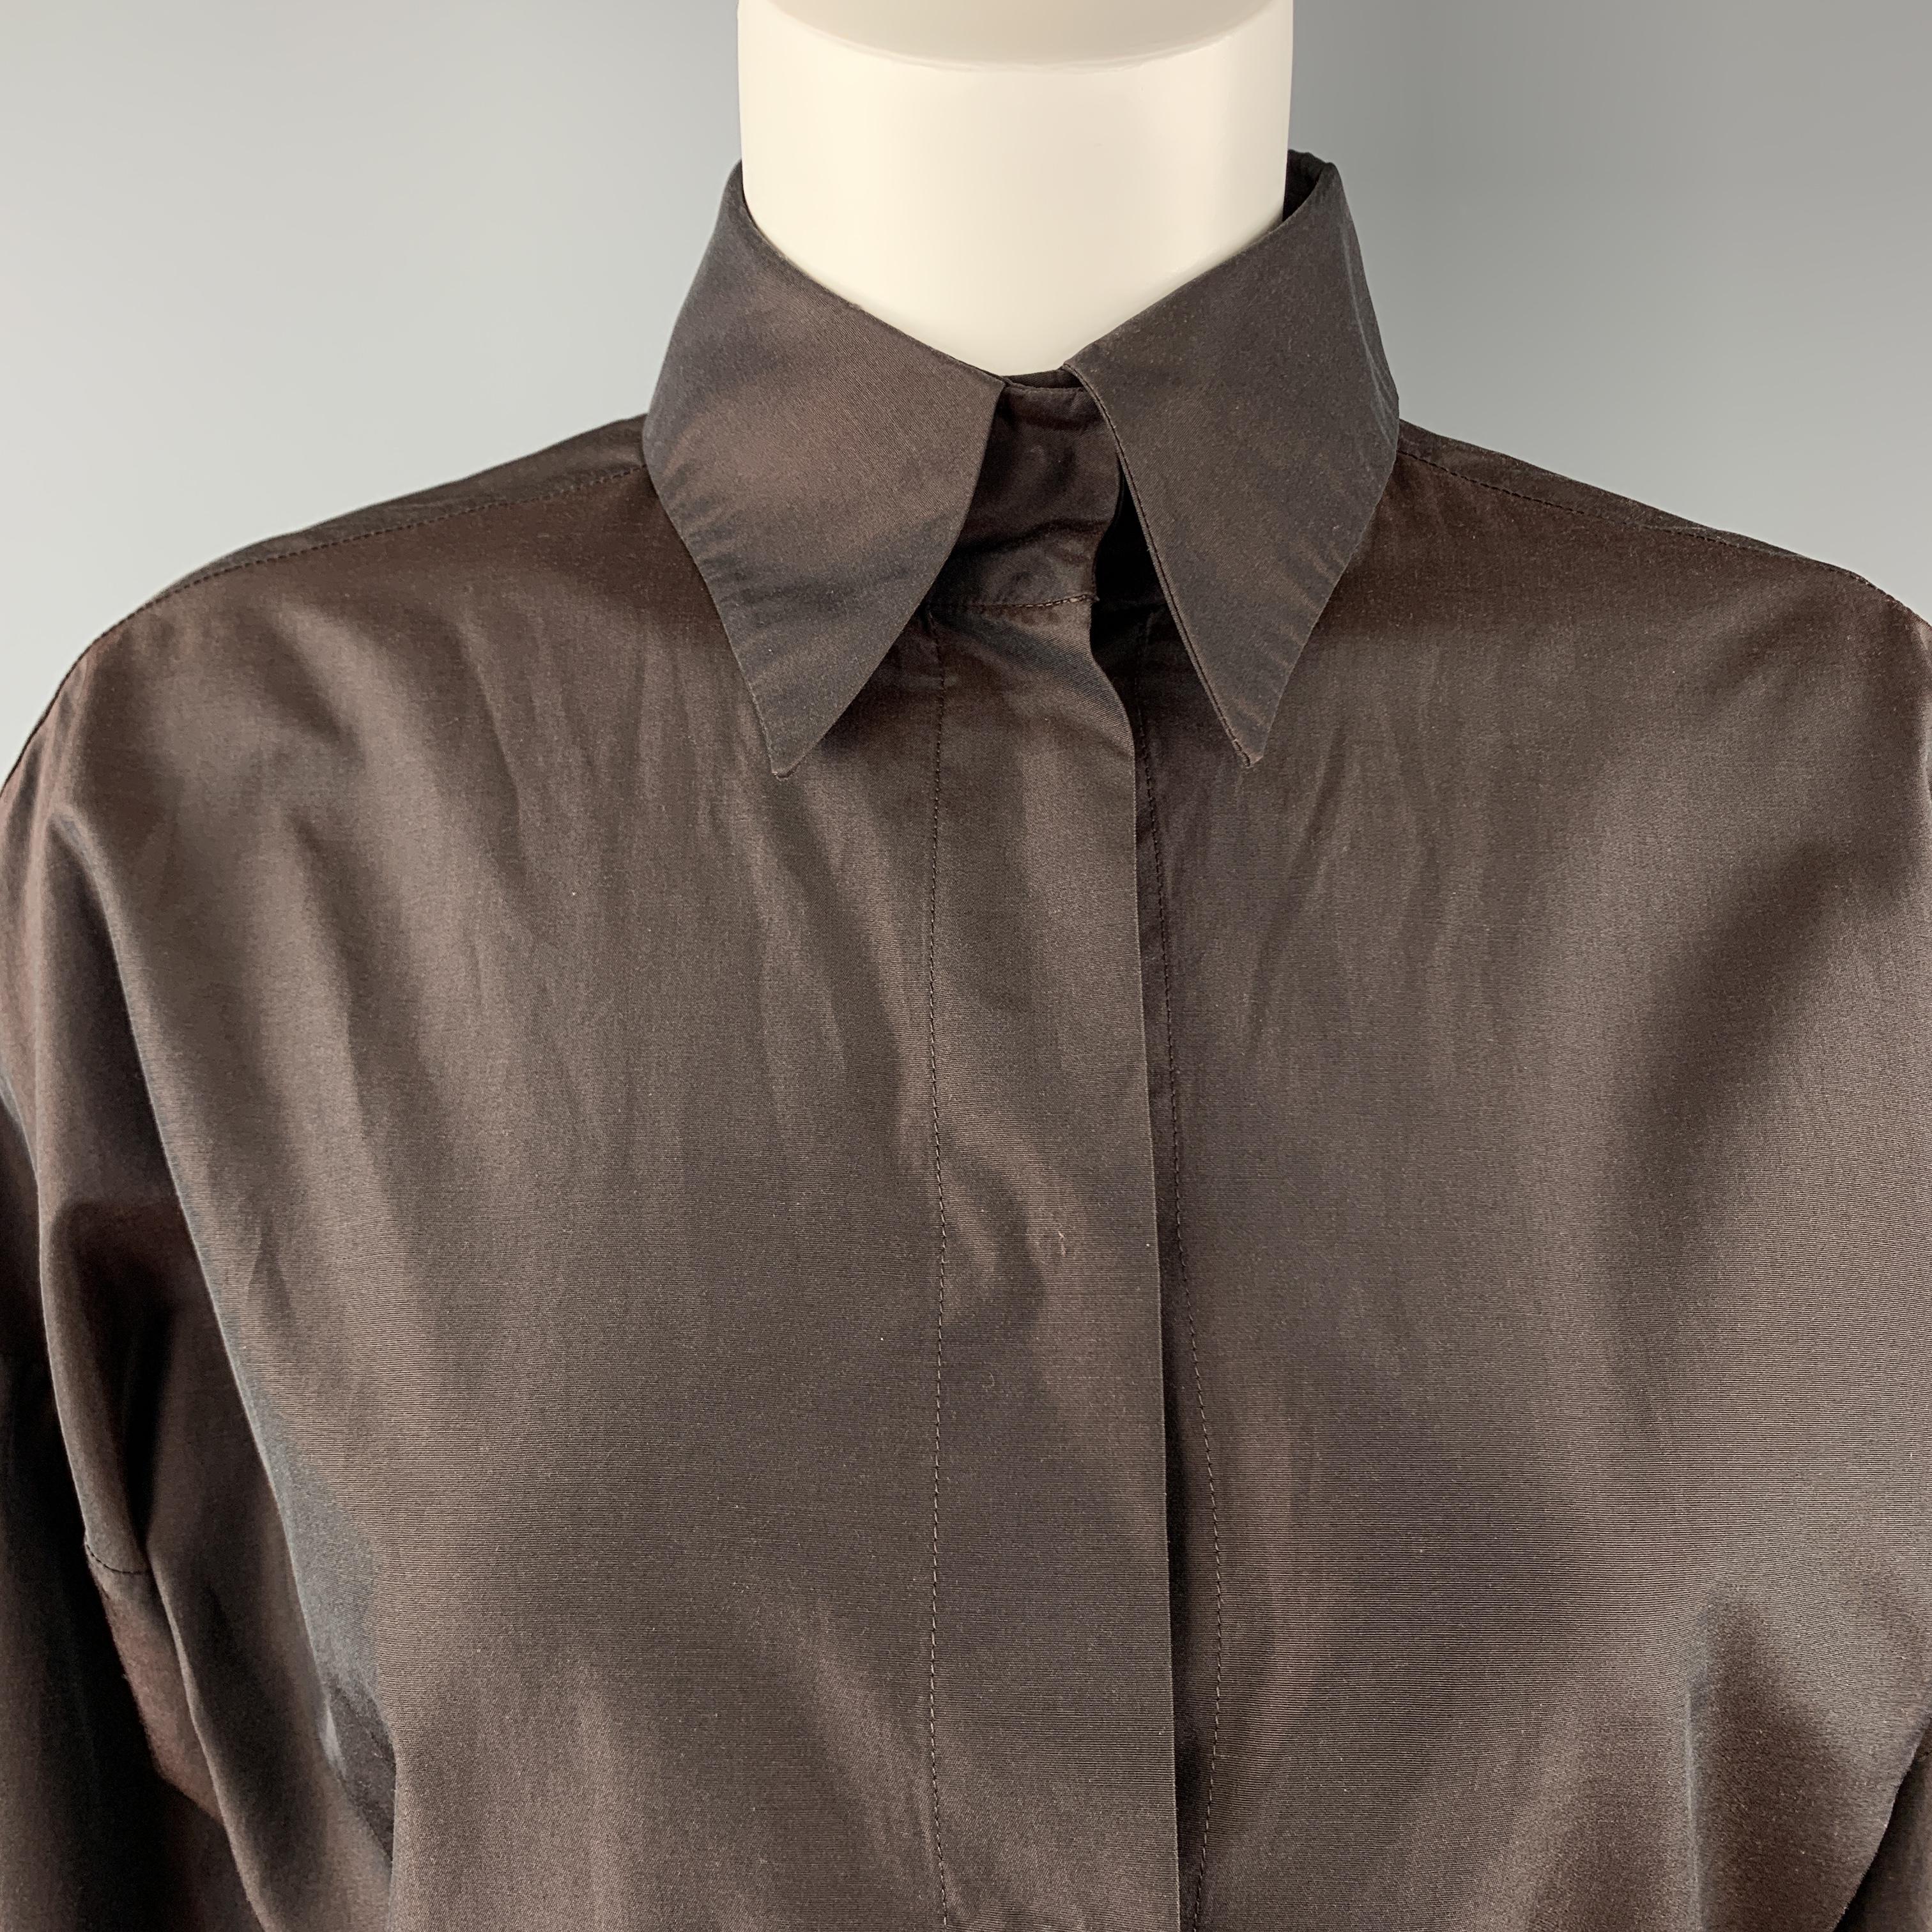 Vintage YVES SAINT LAURENT RIVE GAUCHE blouse comes in brown silk blend taffeta with a pointed collar, drop shoulder, and hidden placket snap up front. Made in France.

Excellent Pre-Owned Condition.
Marked: IT 40

Measurements:

Shoulder: 24